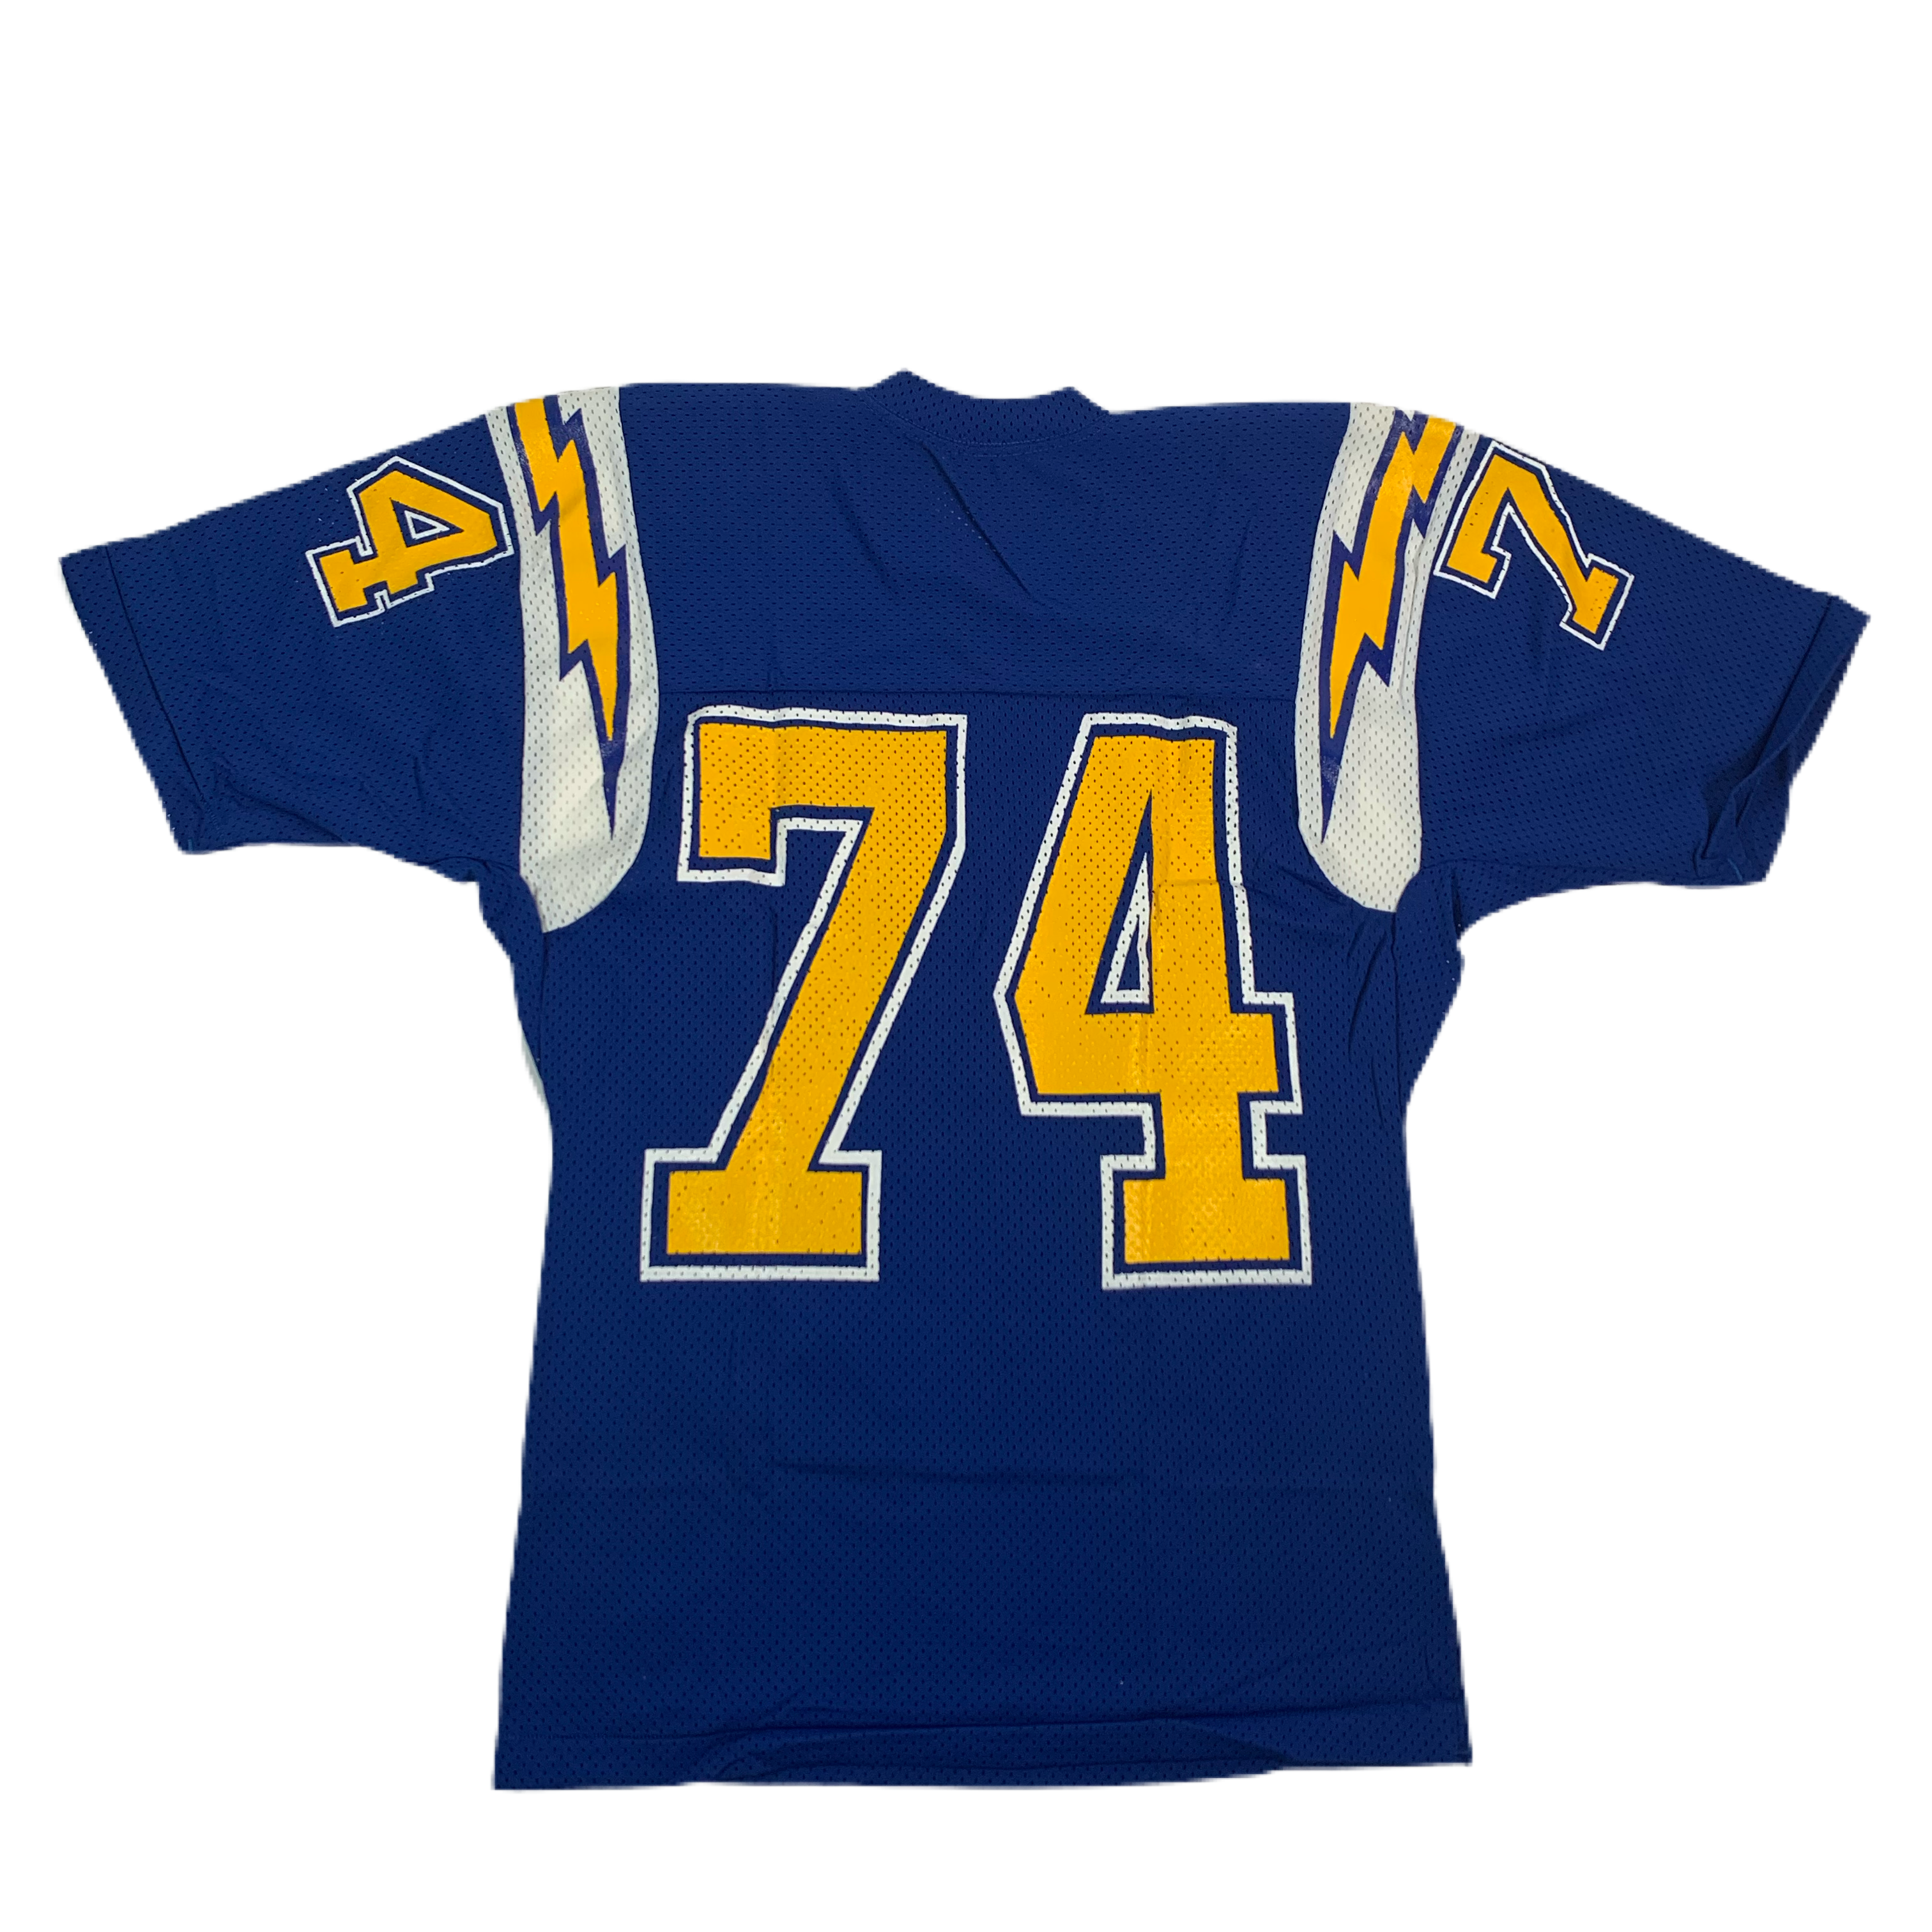 Vintage Sand Knit 'Deacon Jones' San Diego Chargers Football Jersey